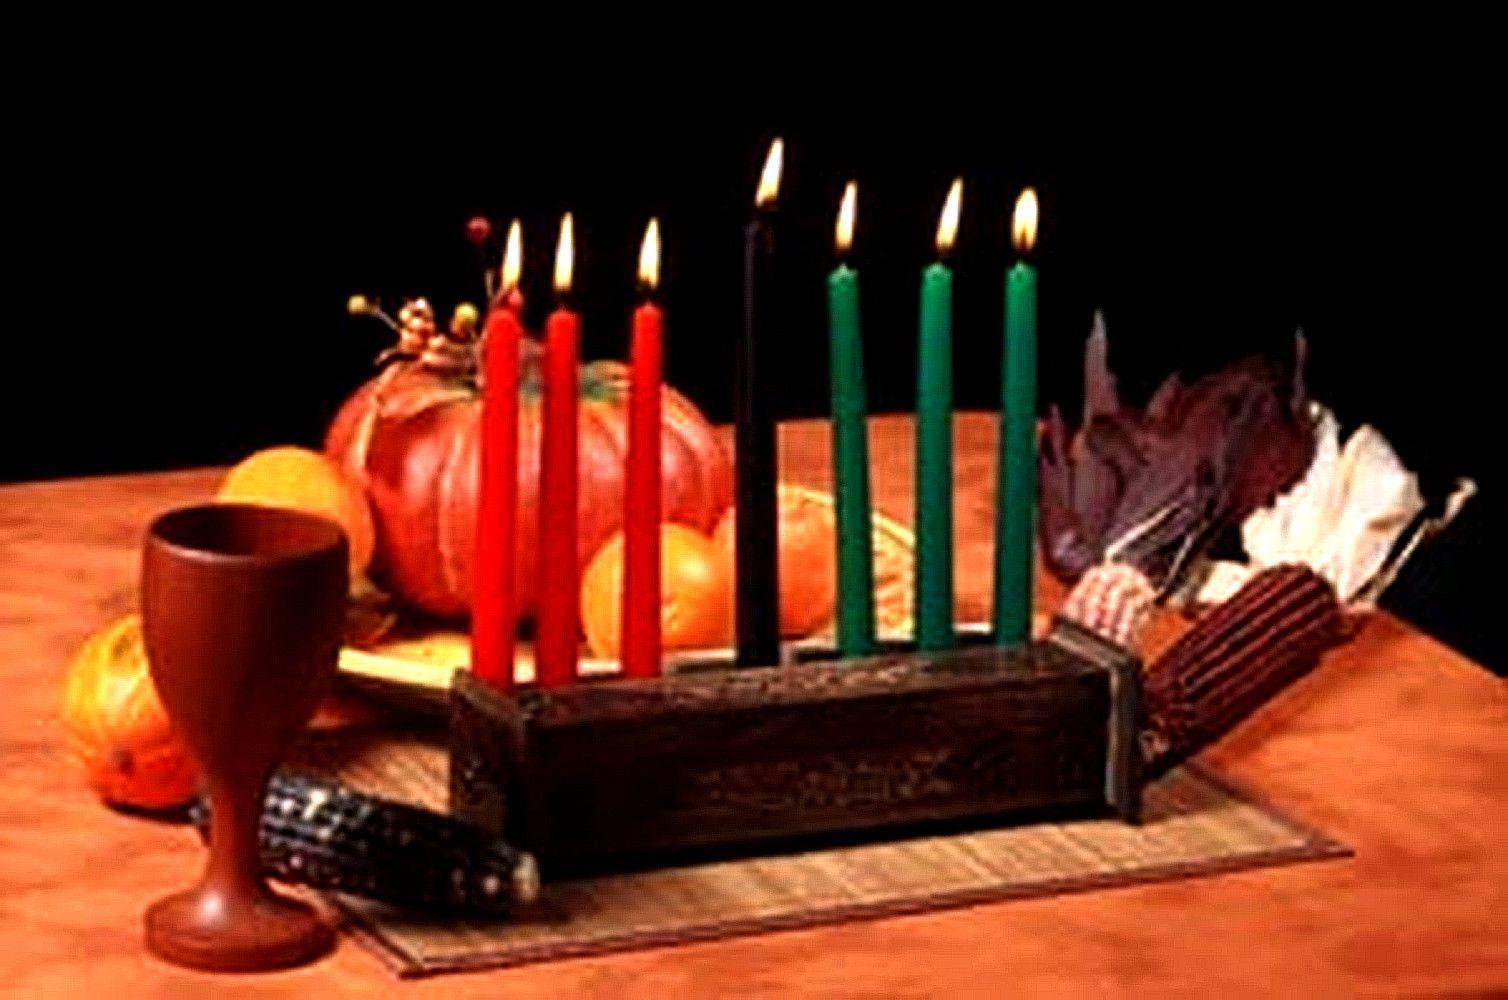 Picture About Kwanzaa. Public Domain Clip Art Photo and Image